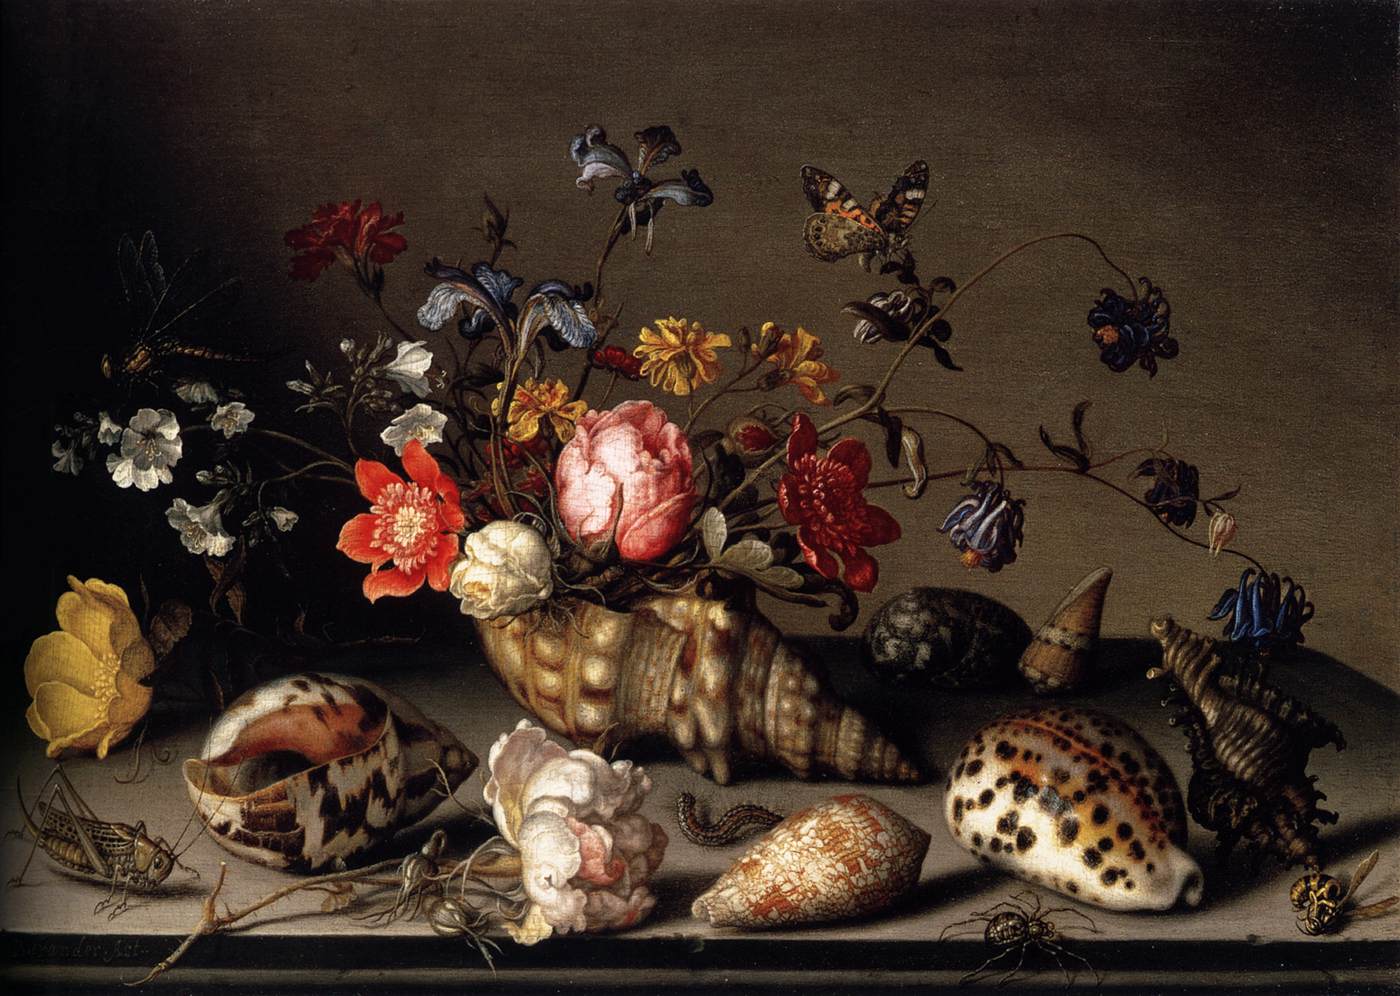 Still Life with Flowers, Shells and Insects